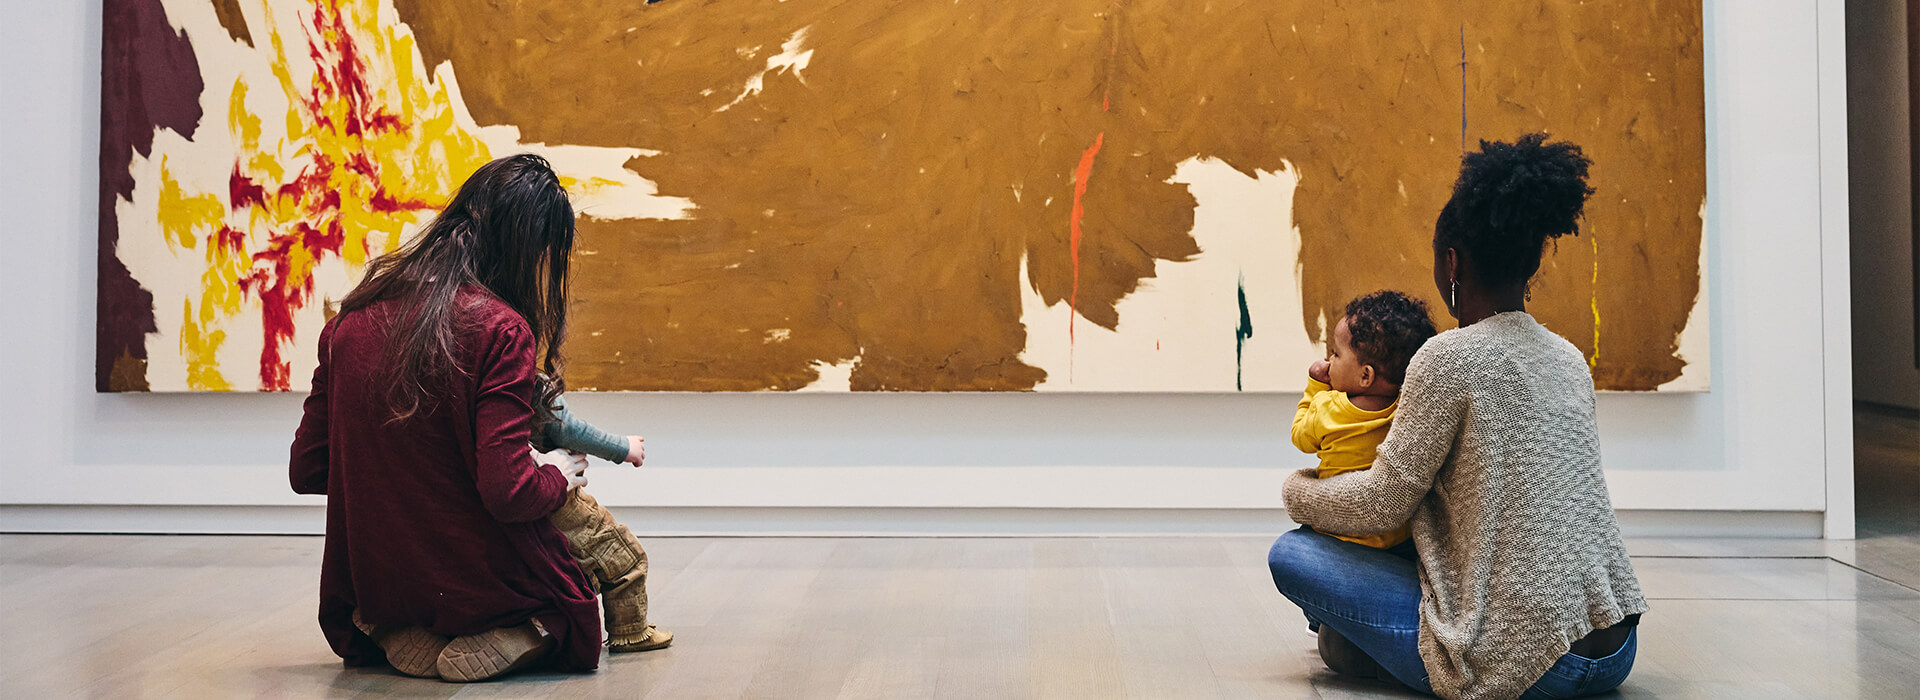 Two moms and their infants sit on the floor in front of a large abstract painting